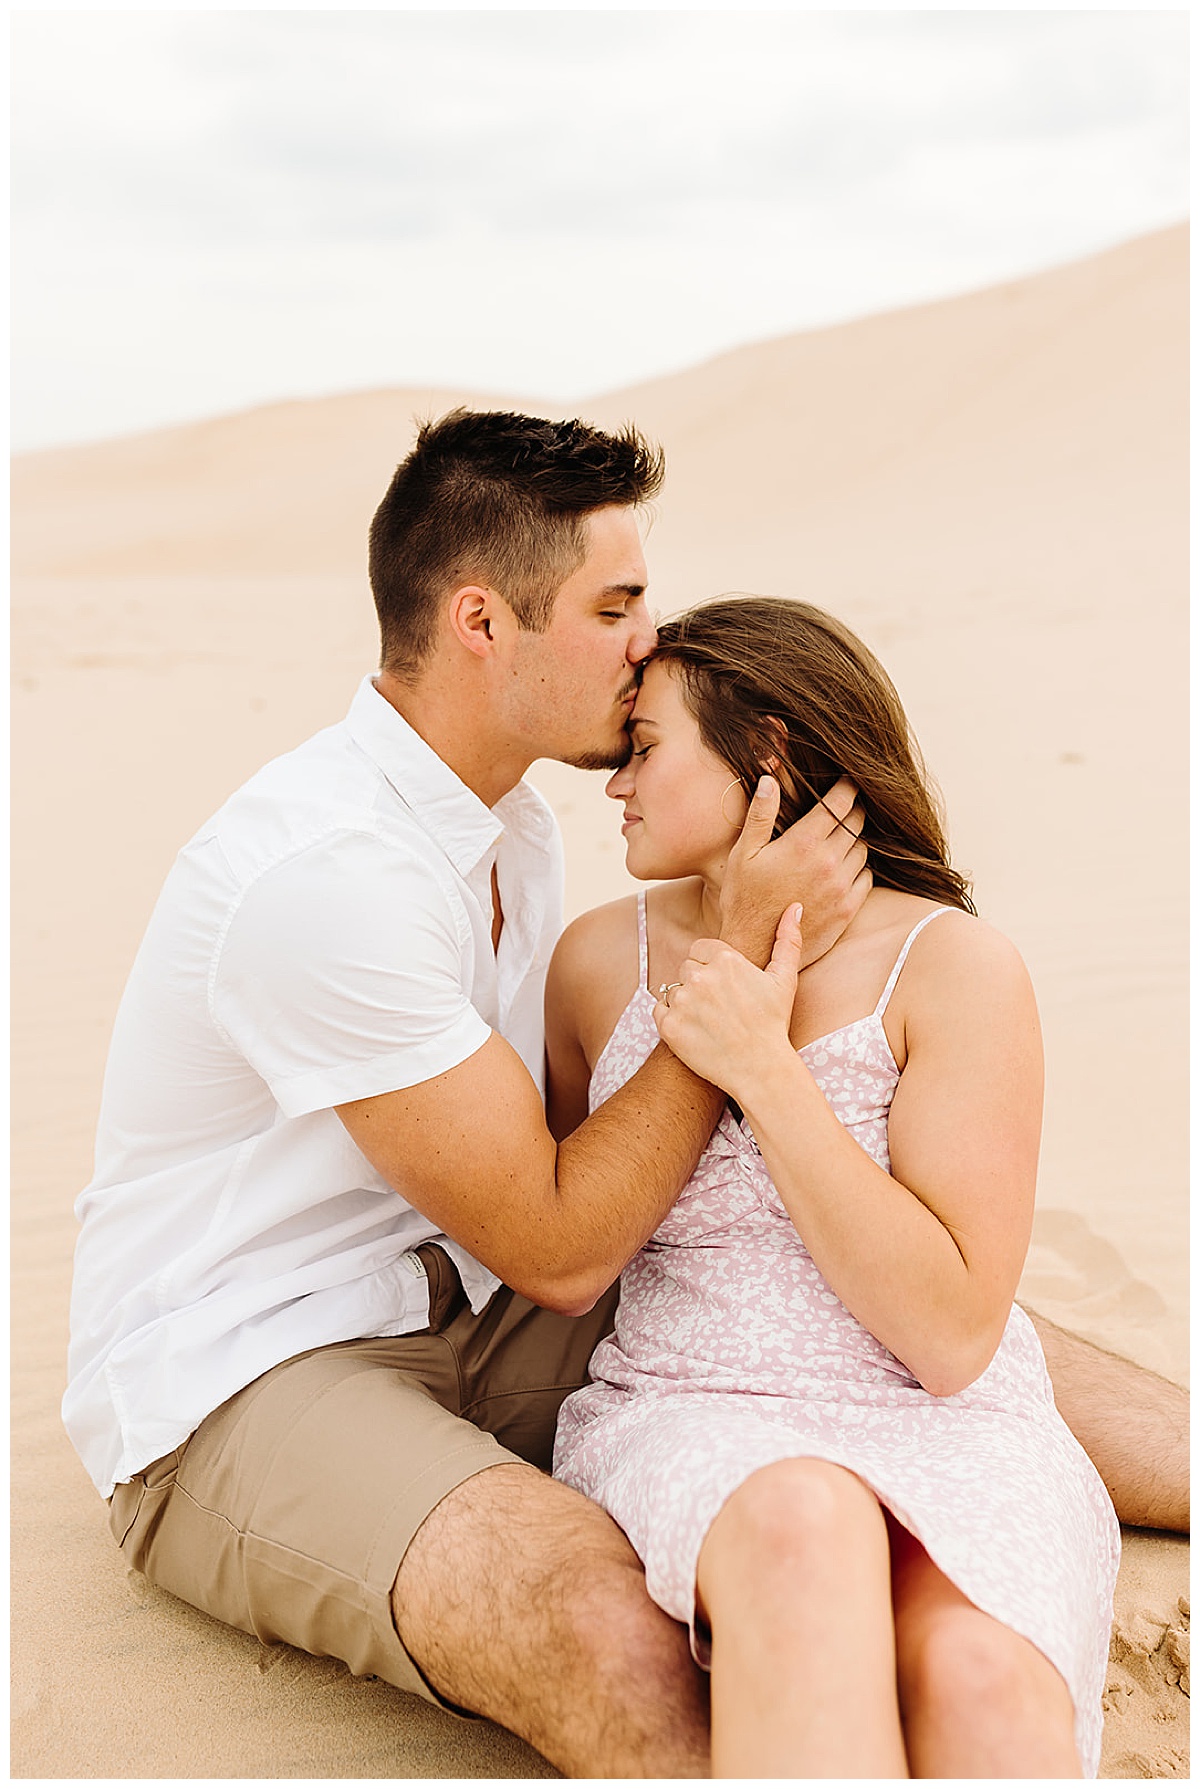 Tender moment shared between couple for Kayla Bouren Photography